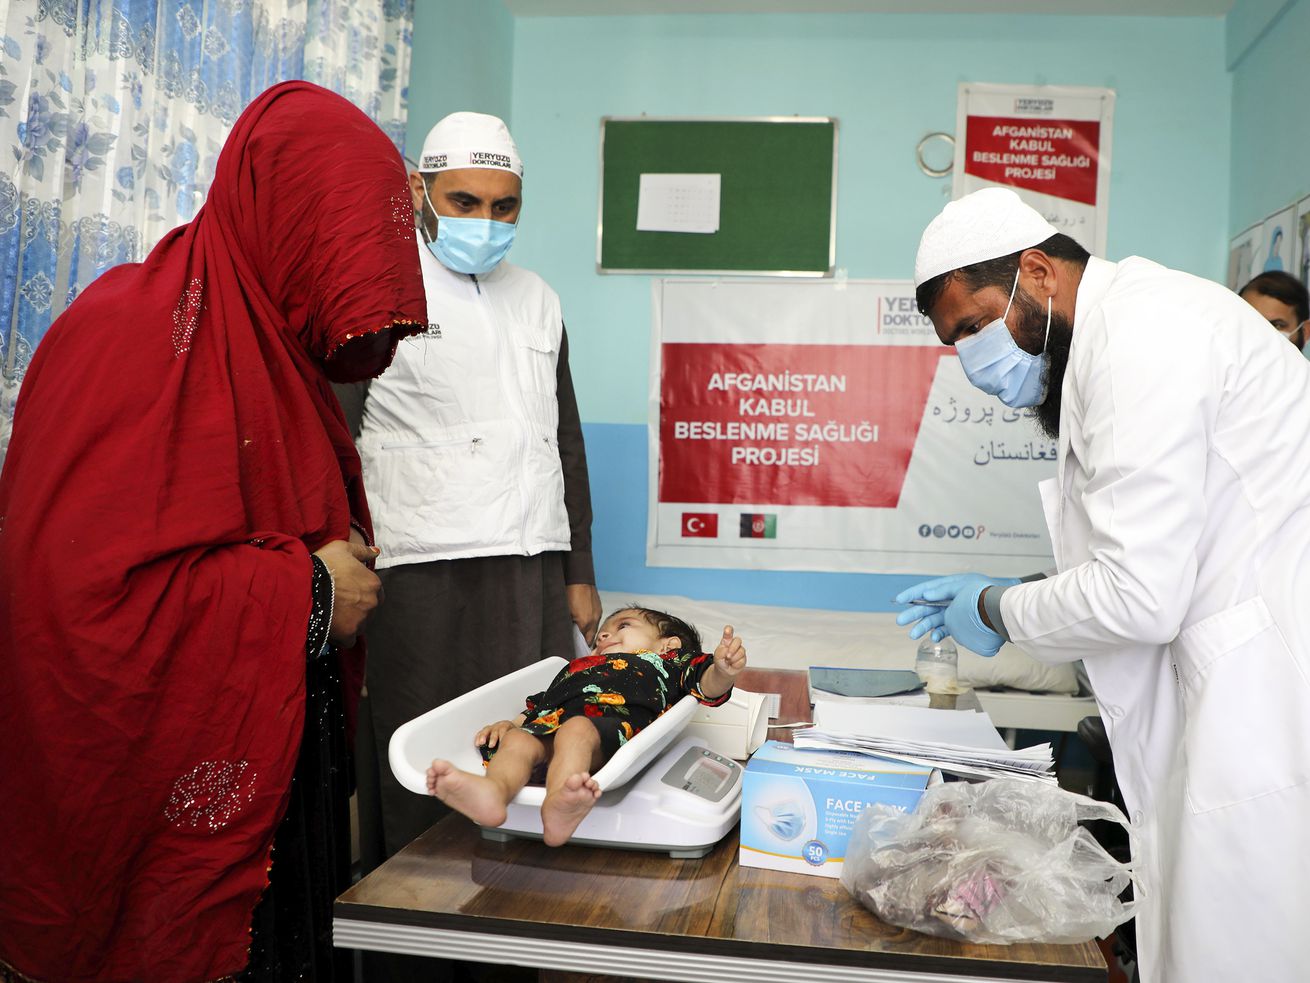 Will the Taliban roll back two decades of public health progress in Afghanistan?